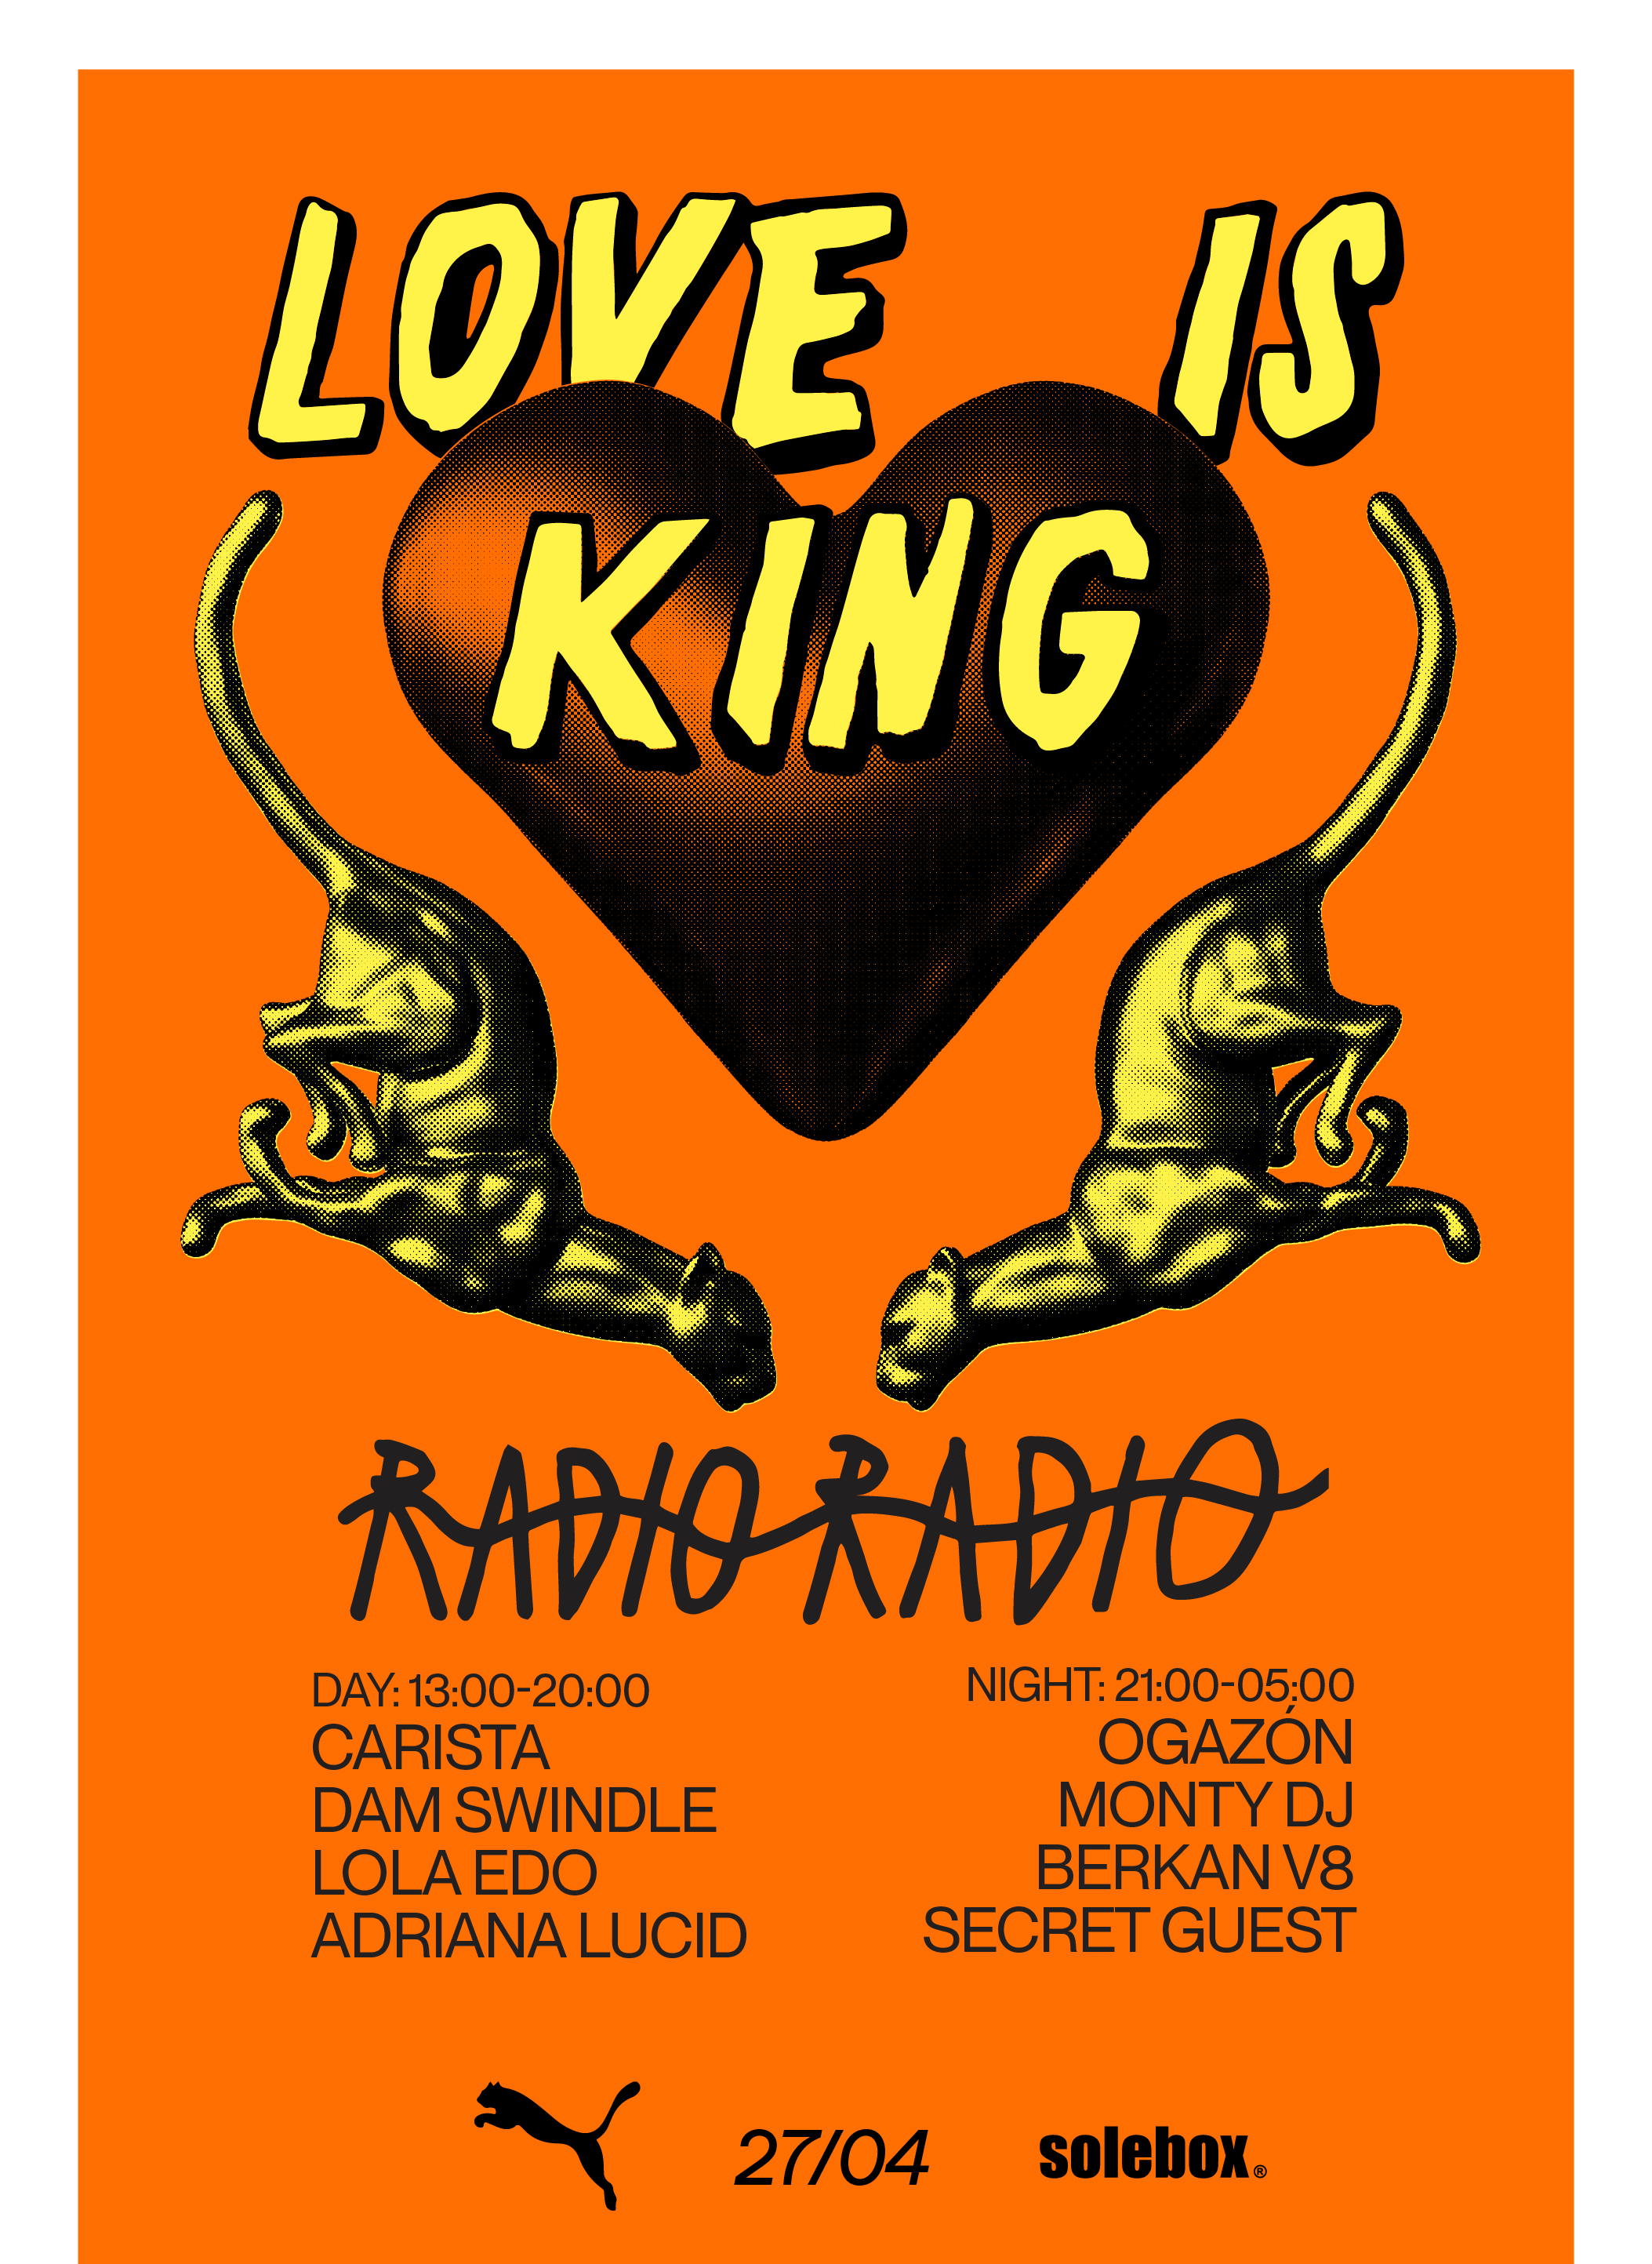 LOVE IS KING - FREE BLOCK PARTY - Página frontal